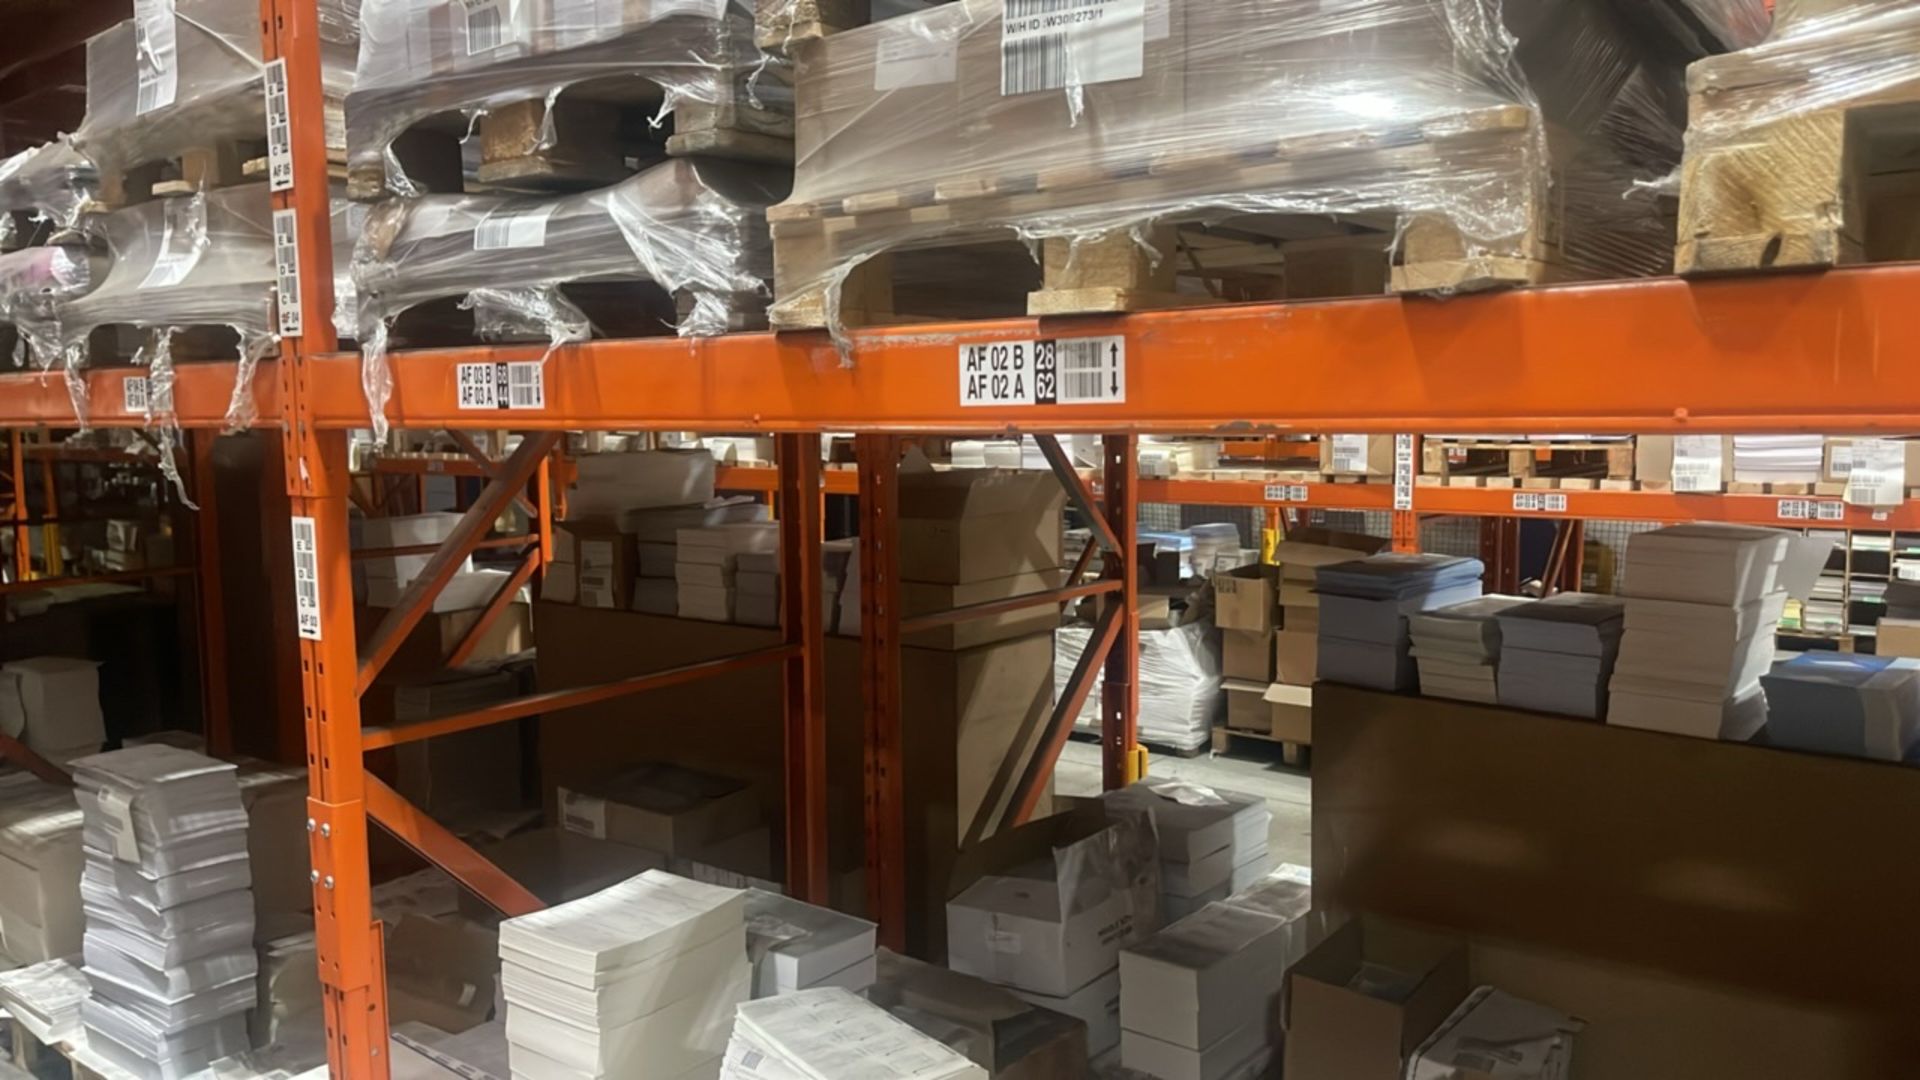 23 Bays Of Boltless Pallet Racking - Image 8 of 9